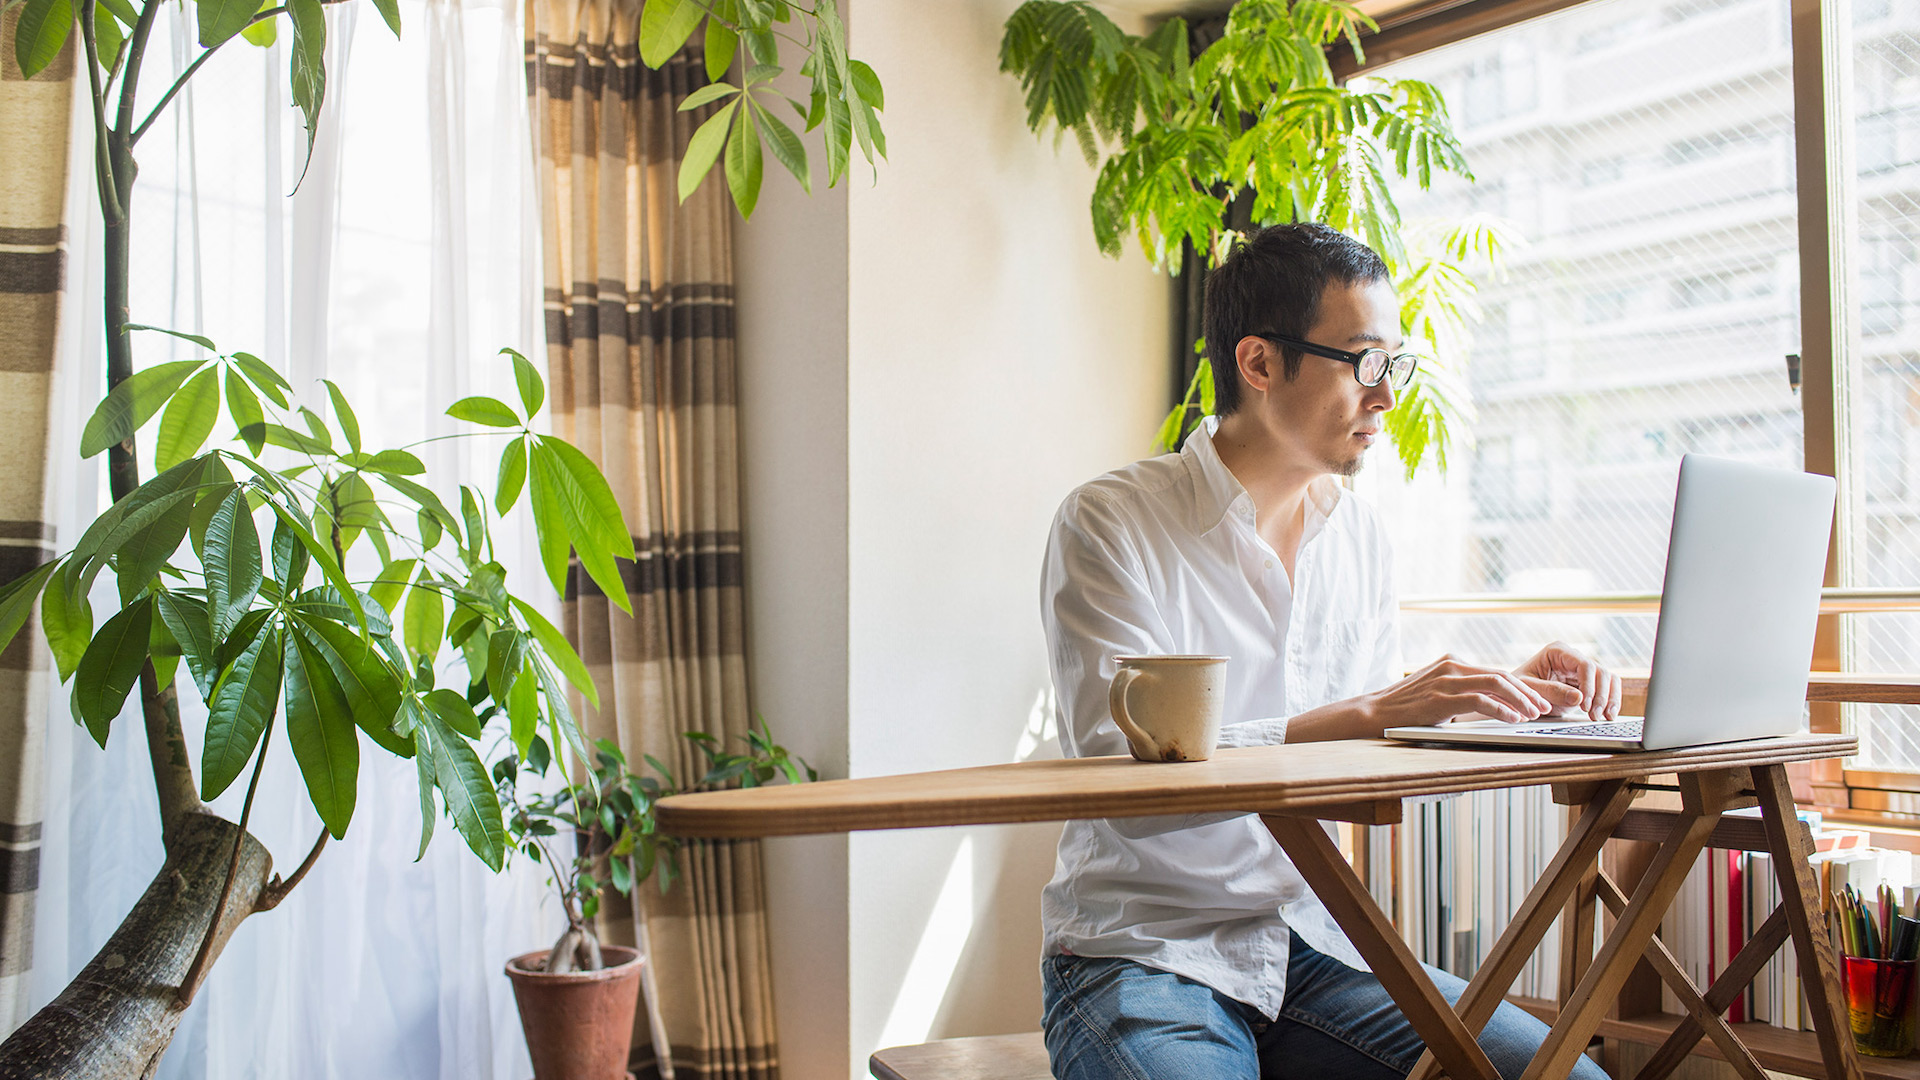 10 Reasons Why You Should Let Your Employees Work From Home